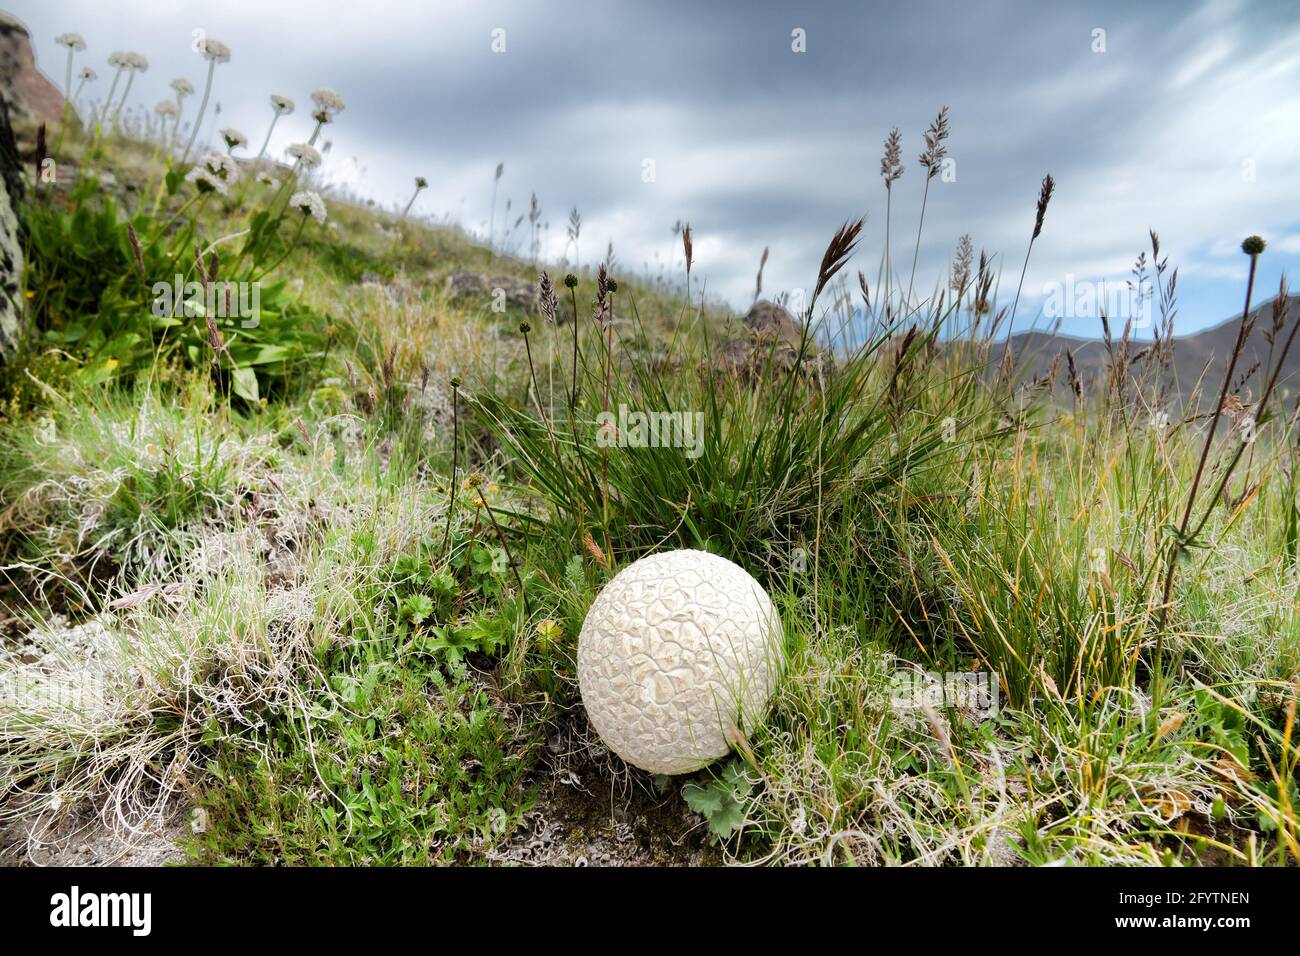 Common puffball mushroom in the alpine meadows of the North Caucasus. Snow-capped peaks are visible in the background Stock Photo